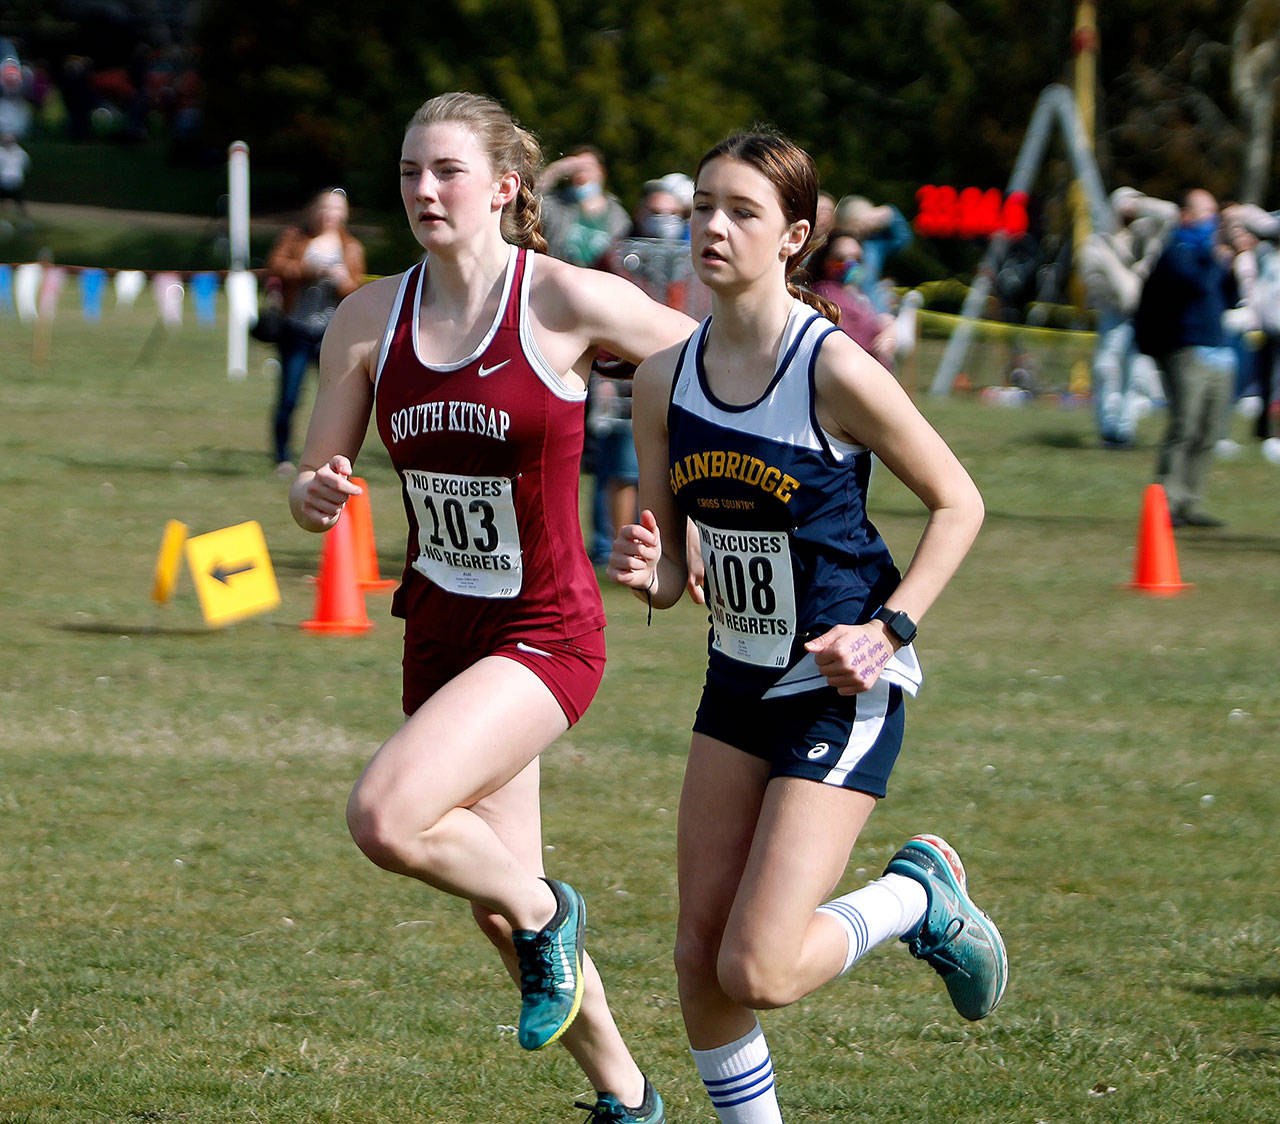 South Kitsap’s Evelyn Collins-Winn (left) and Bainbridge’s Lily Curtis take off from the starting line at the Olympic League varsity championships at Battle Point Park. (Mark Krulish/Kitsap News Group)